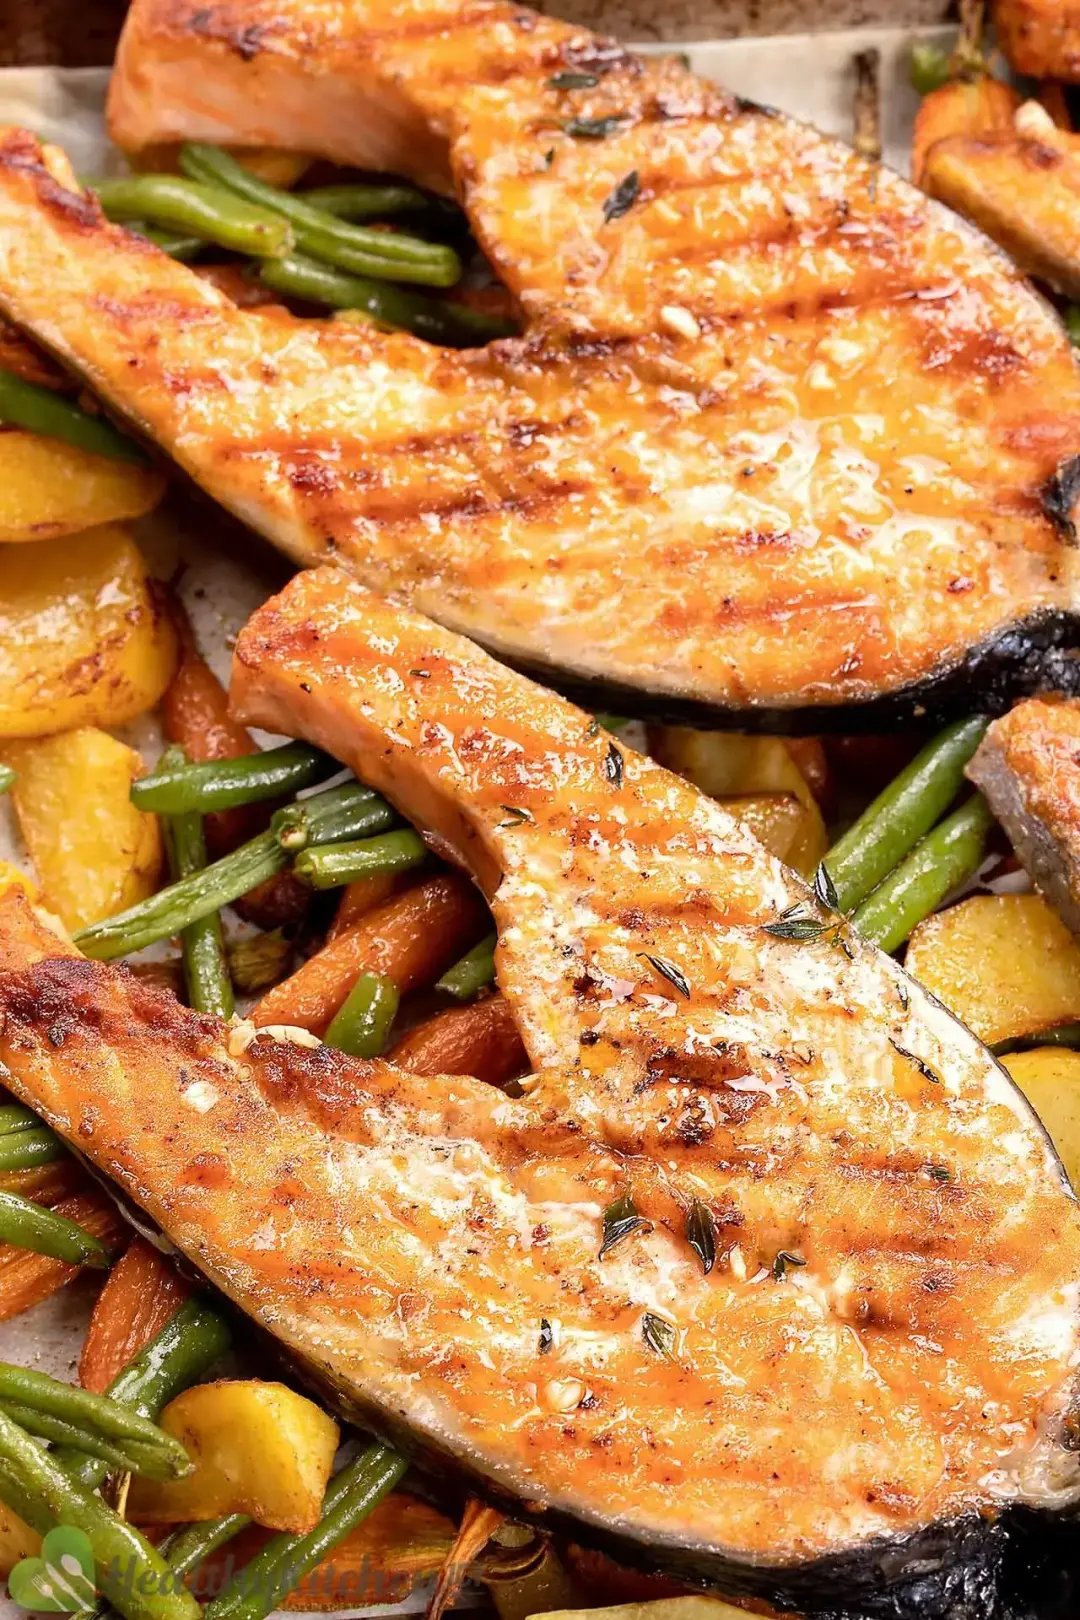 Two grilled salmon steaks atop a baking tray filled with string beans, potato wedges, and baby carrots